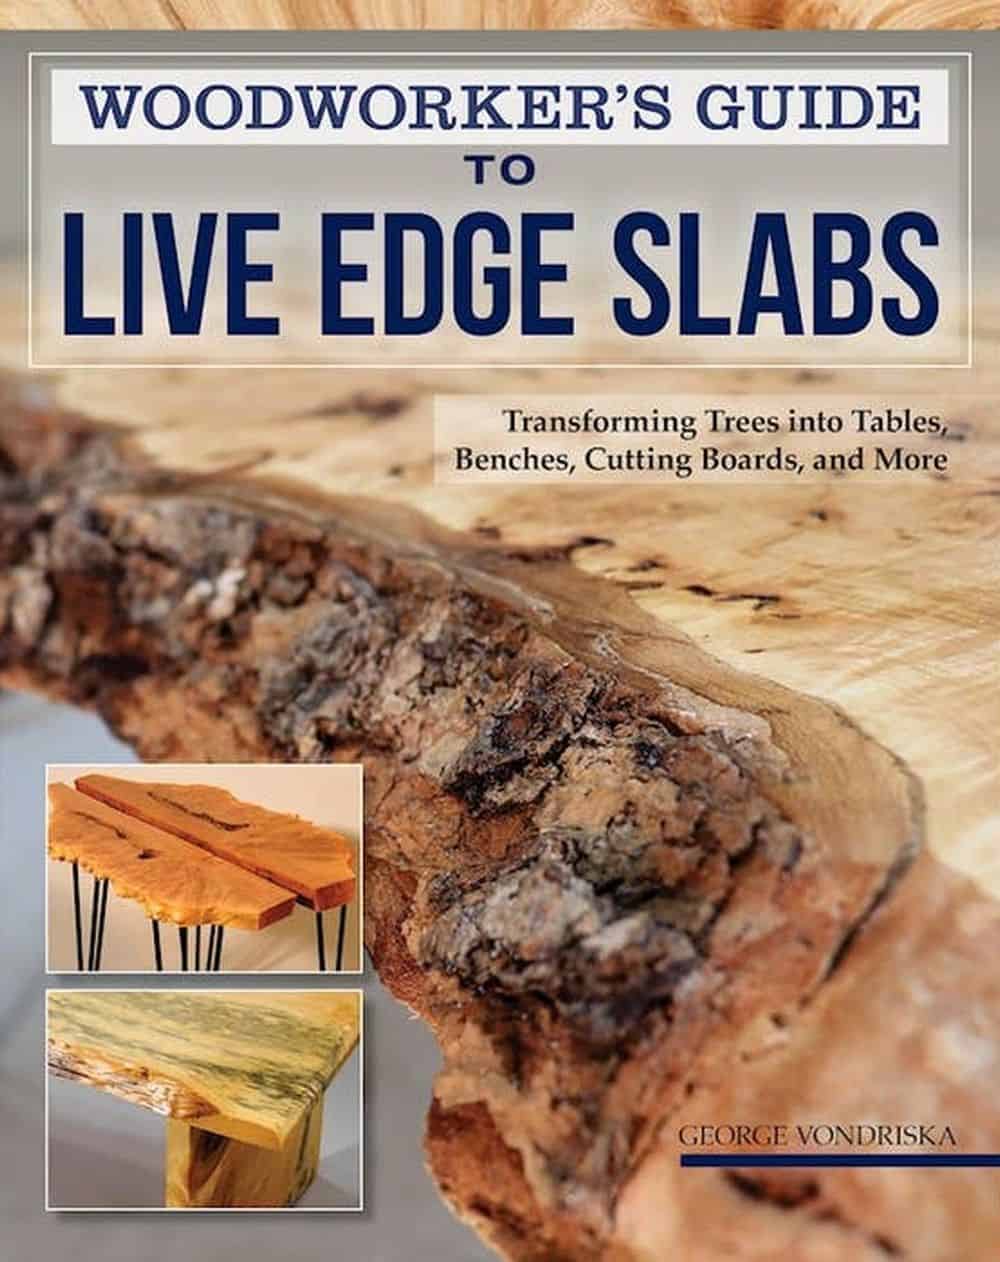 >Woodworker’s Guide to Live Edge Slabs